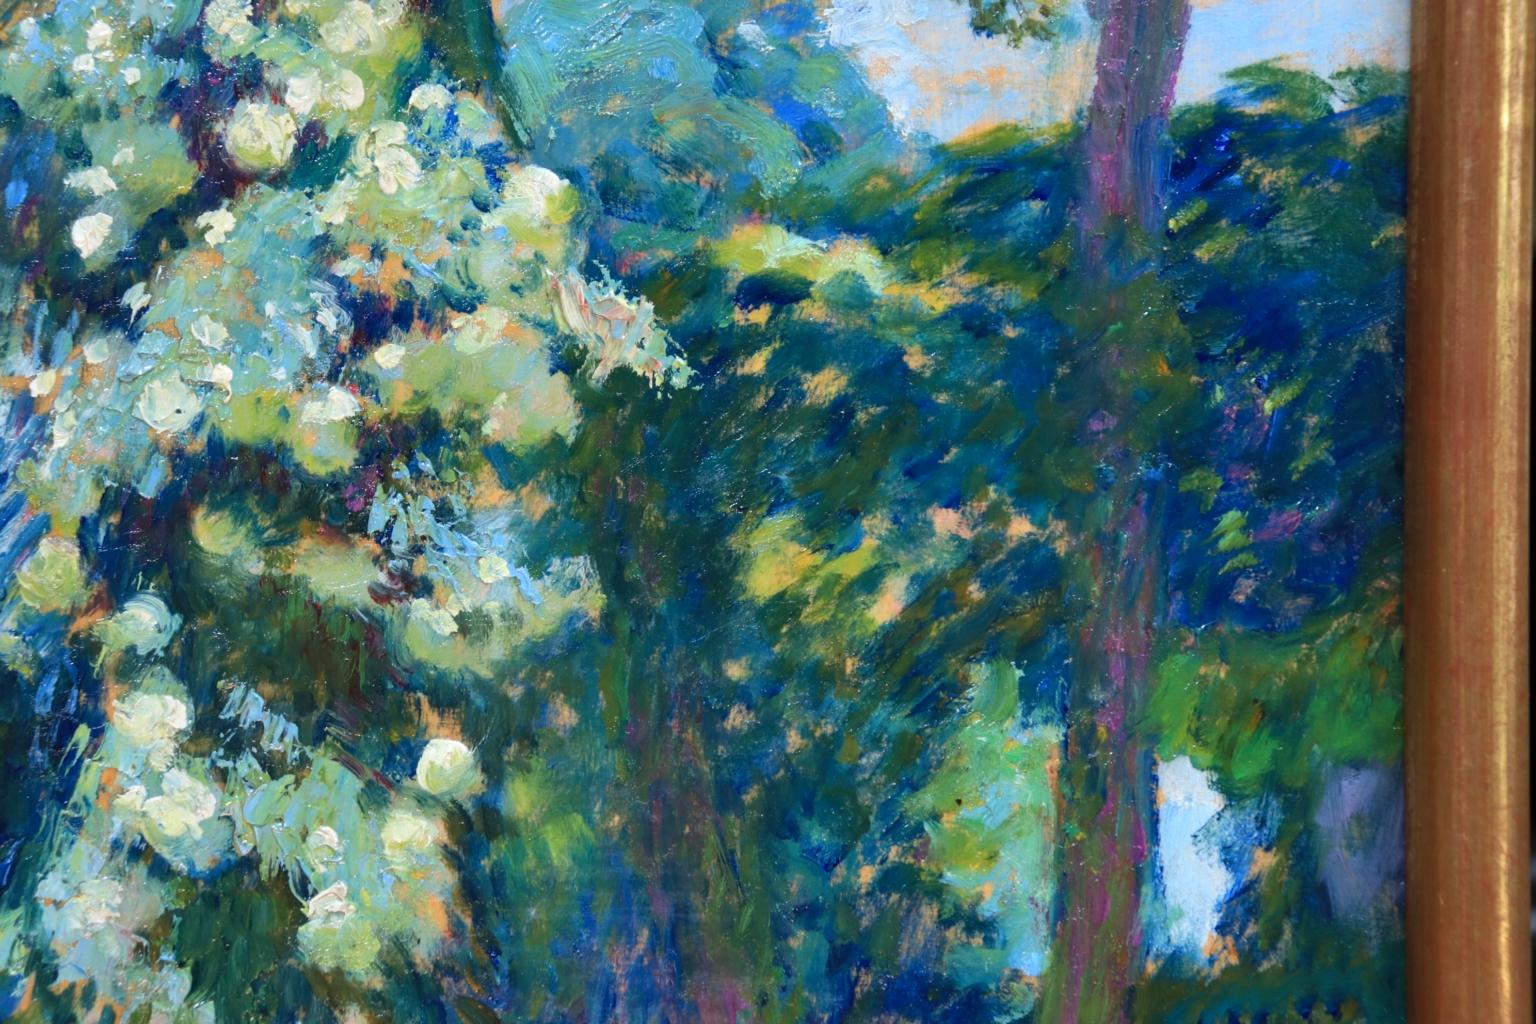 A wonderful oil on panel by post-impressionist painter Octave Guillonet. The work is beautifully painted in blues, greens and white and depicts trees starting to flower. Signed lower left.

Dimensions:
Framed: 15